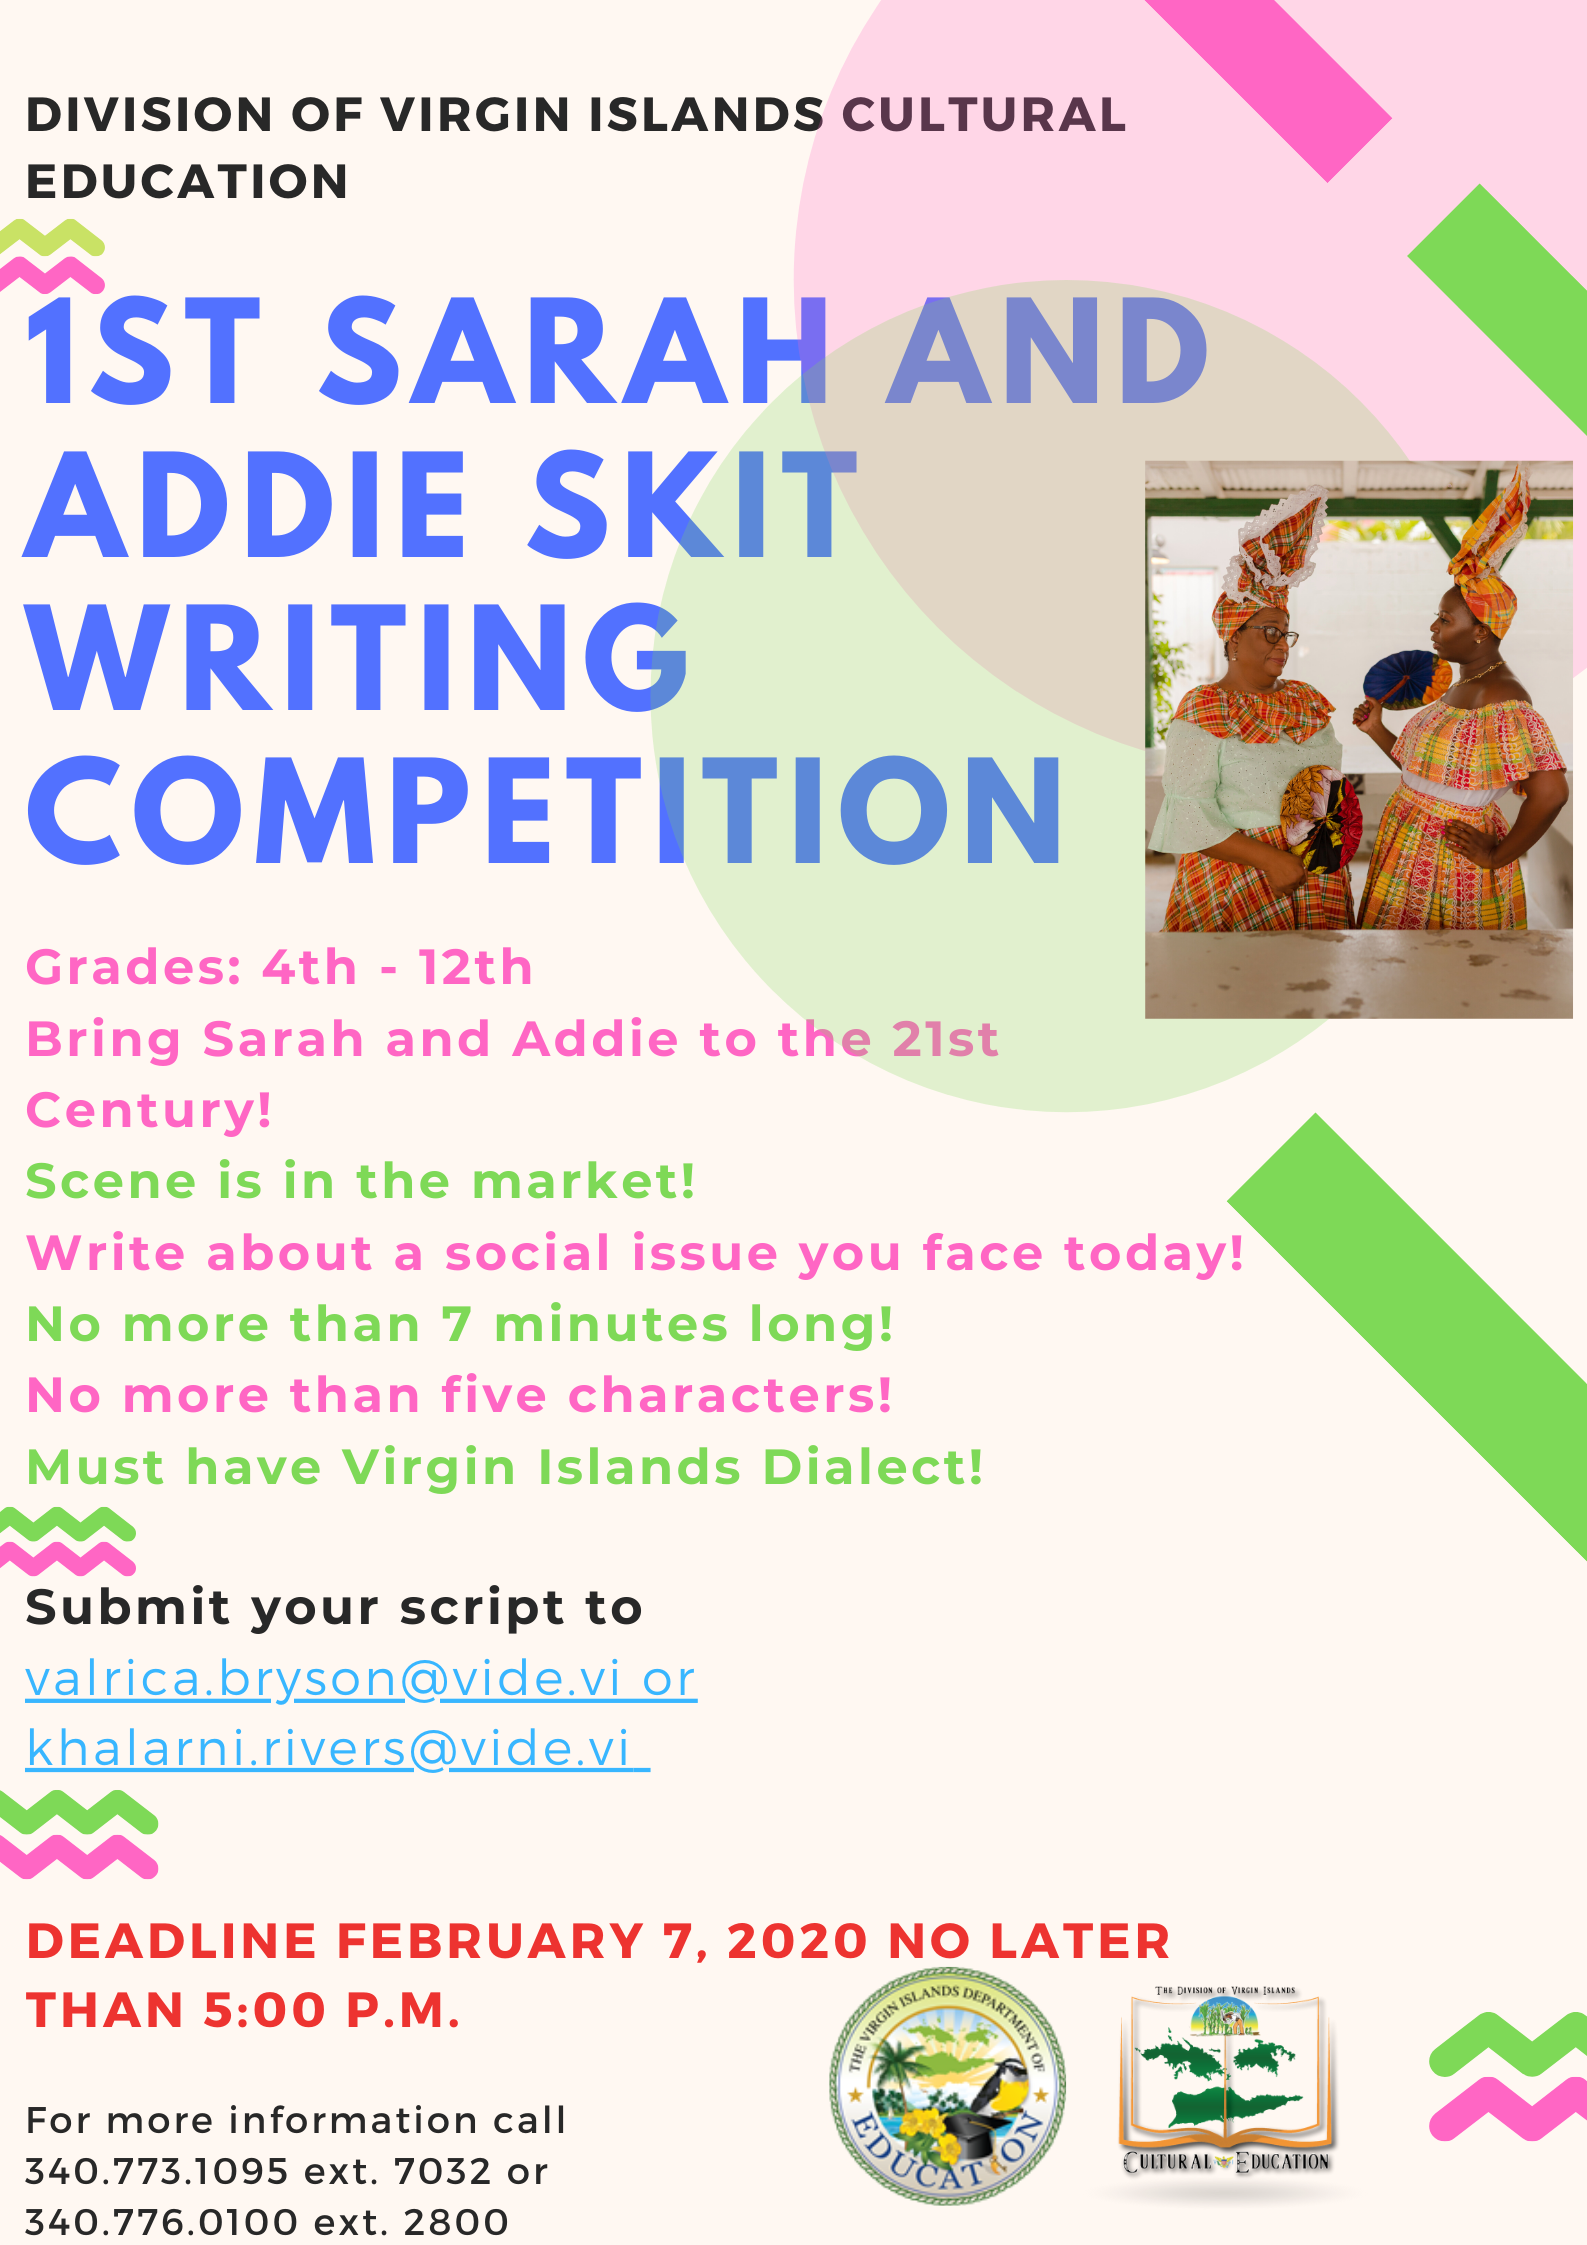 Sarah and Addie Skit writing competition-logo.png